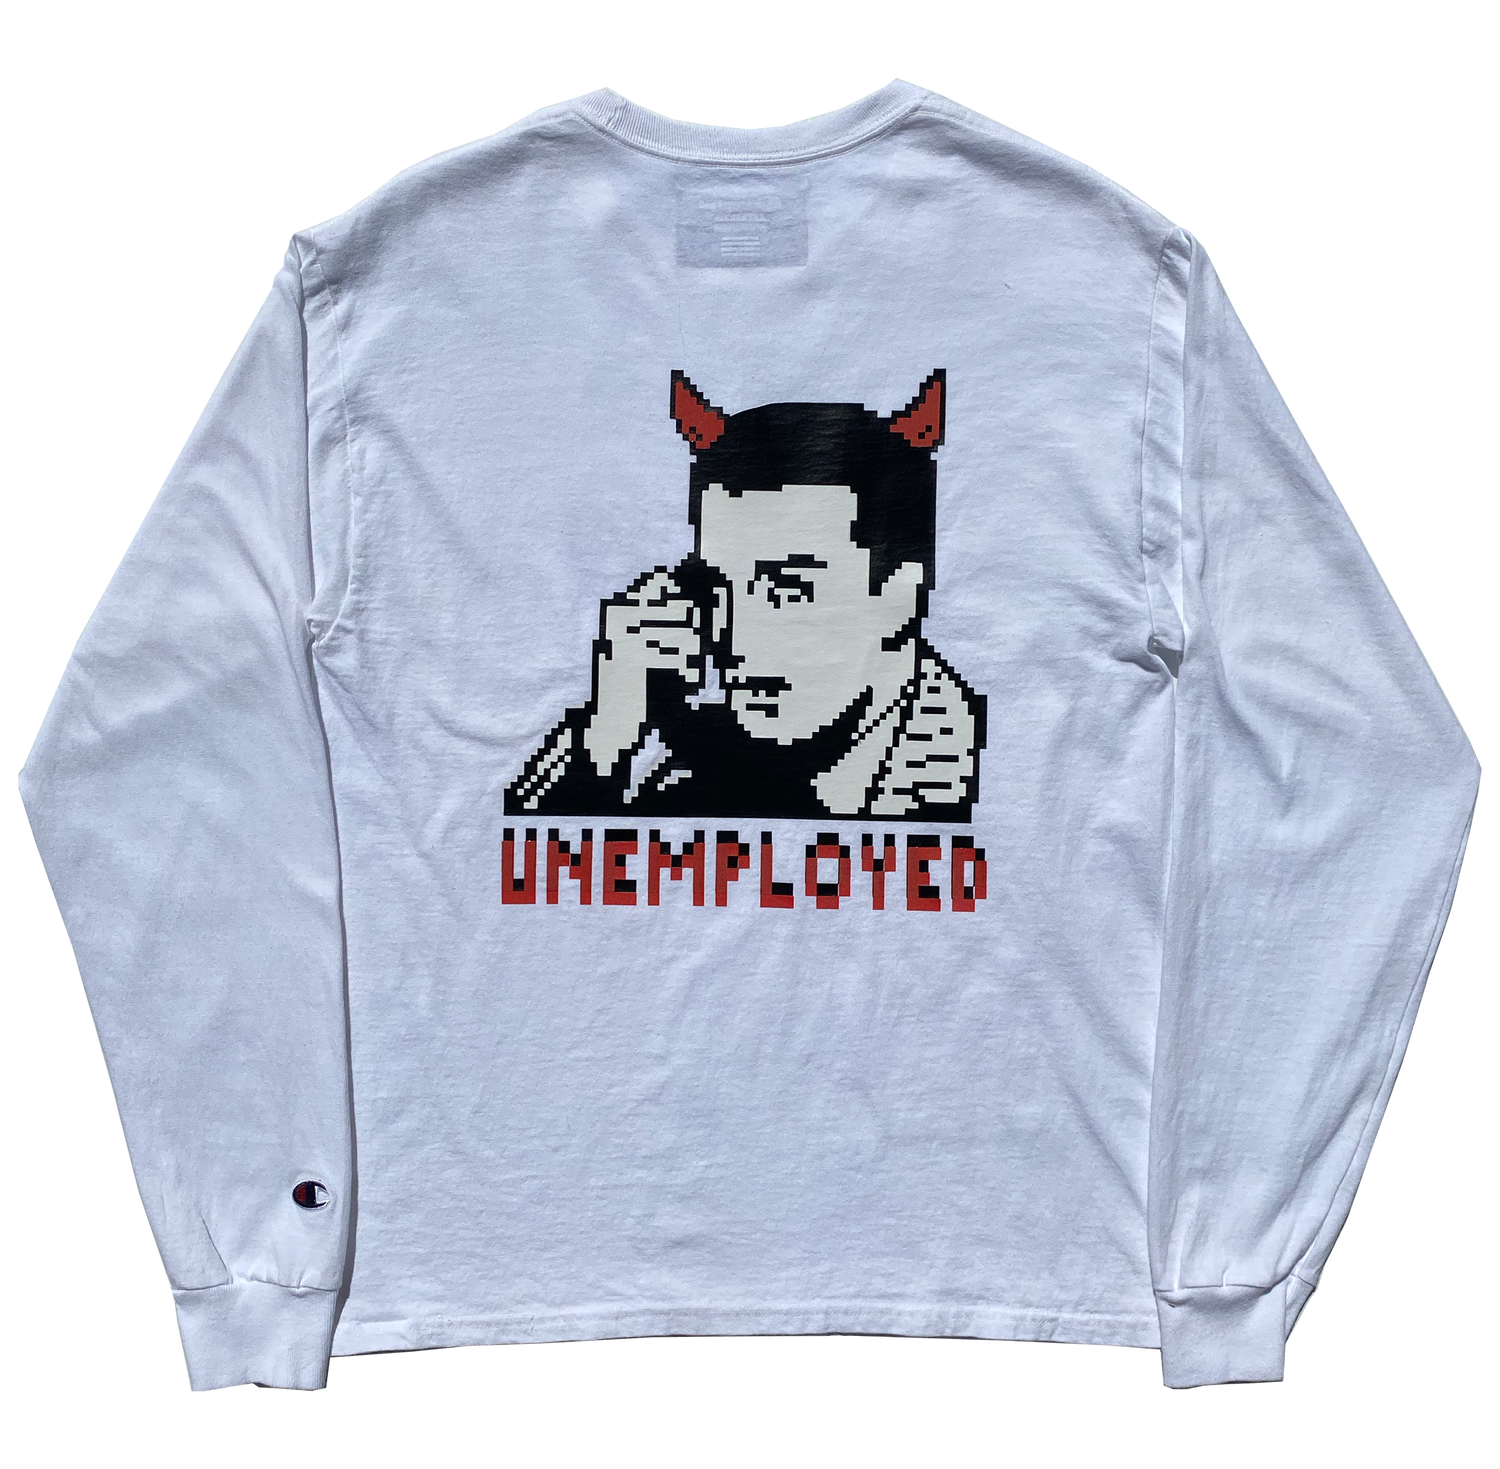 1-800-UNEMPLOYED LONGSLEEVE - One For Good Luck!